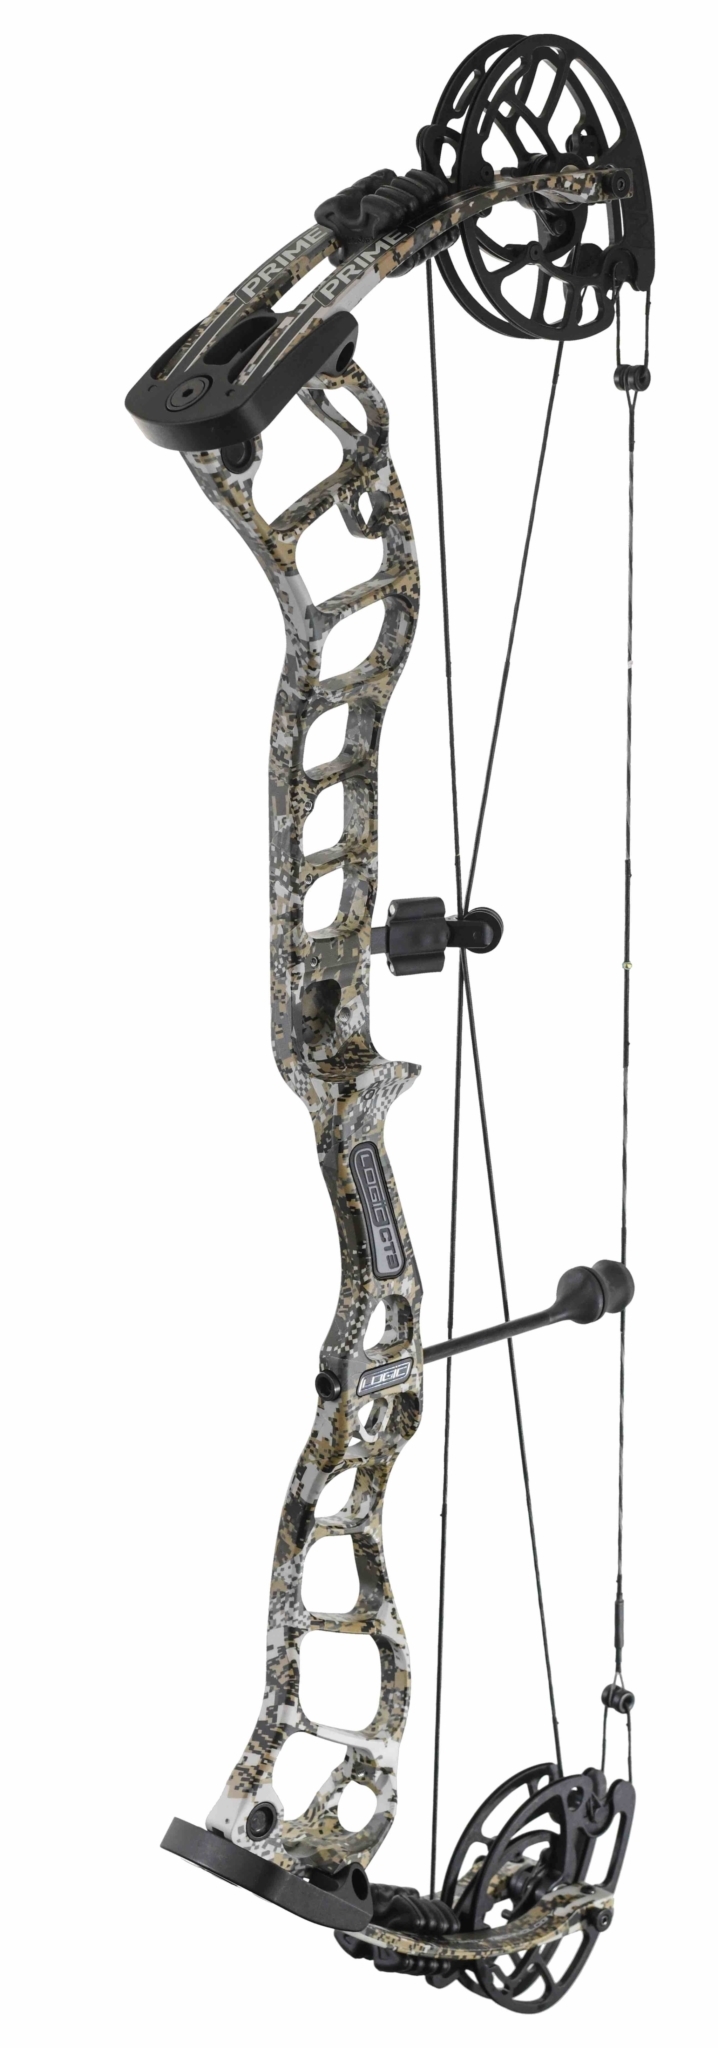 G5 Compound Bows – Models Review